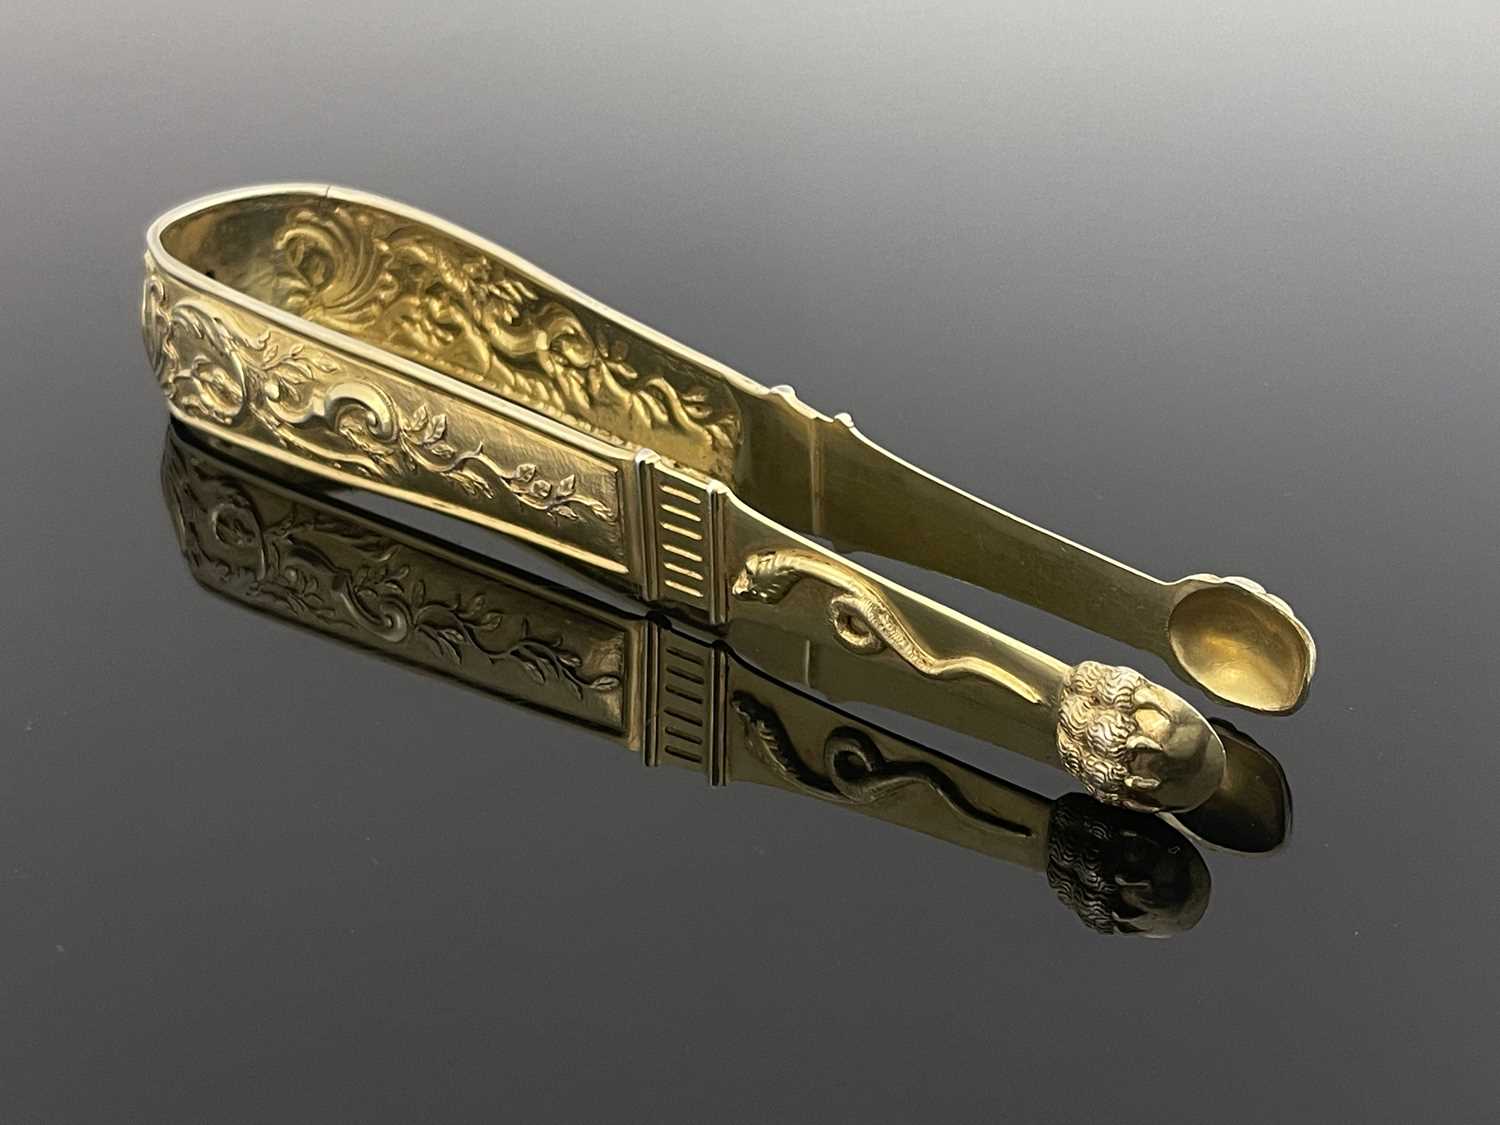 A large pair of Continental silver gilt sugar tongs, circa 1790, cast and chased in relief with